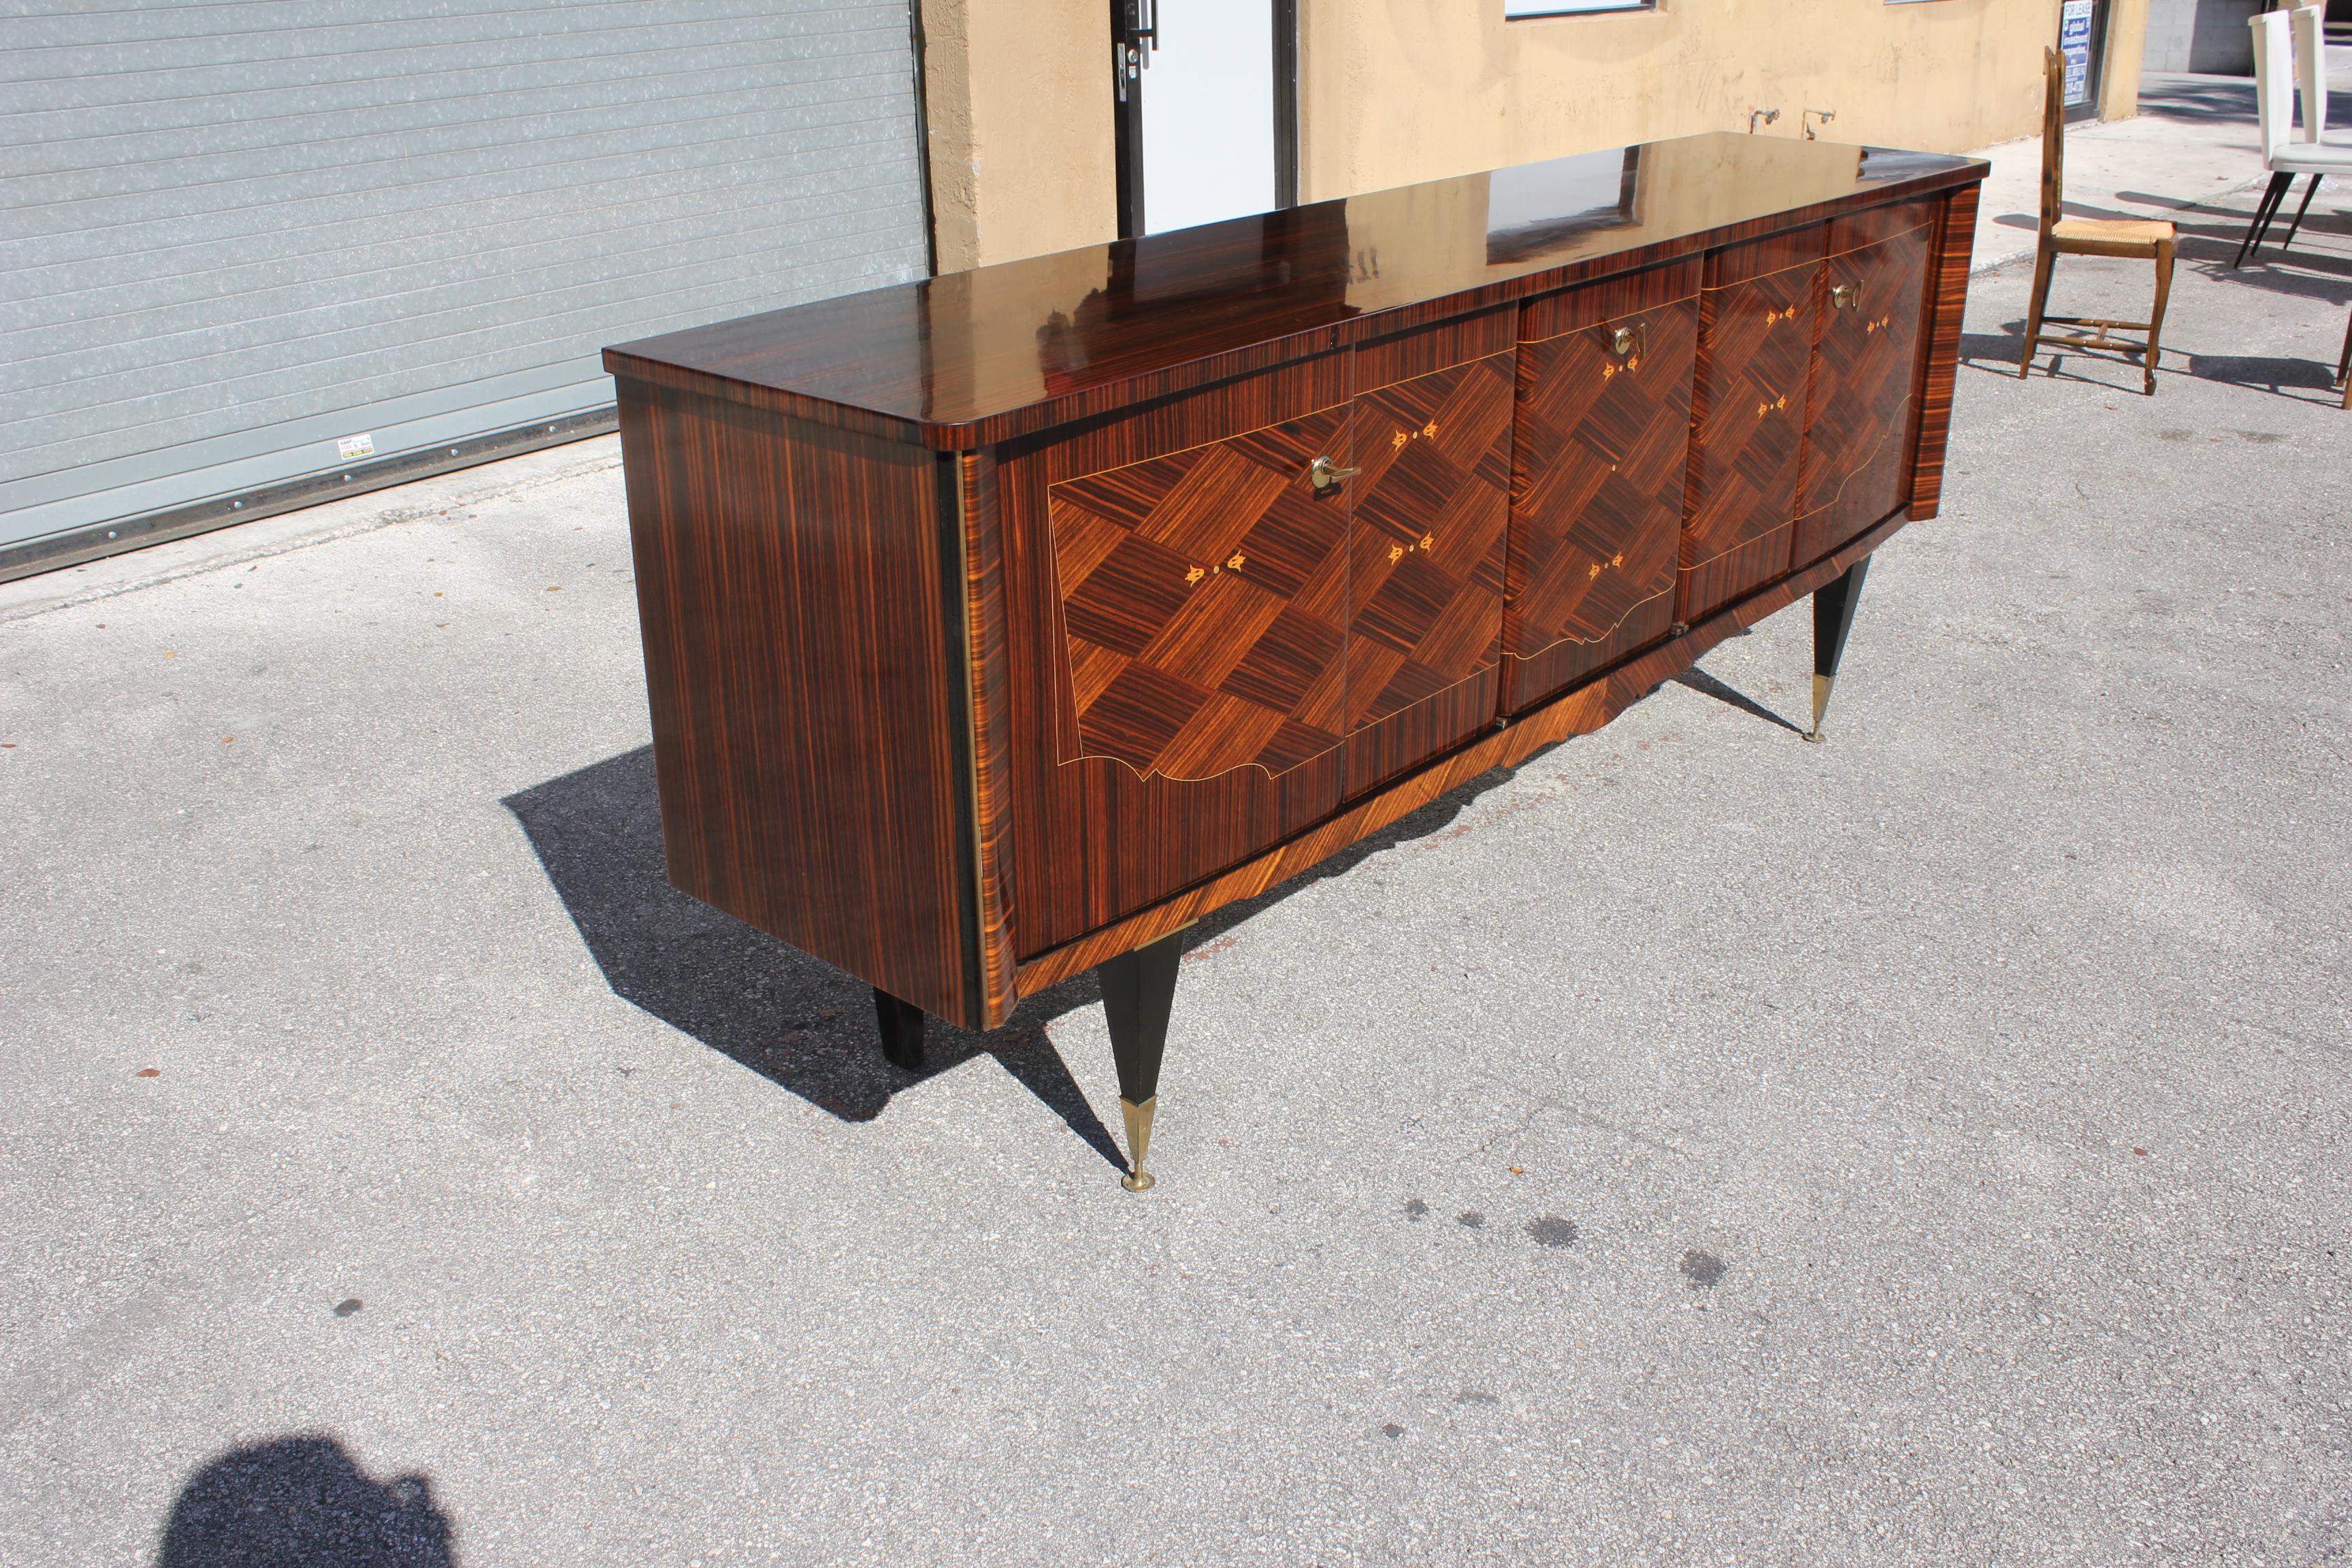 Long French 5 Doors Exotic Macassar Ebony Mother of pearl Sideboard / Buffet / Bar, circa 1940s. The sideboard are in very good condition, With 2 drawers inside, and with 4 shelves adjustable,you can remove all the shelves if you need more Space,